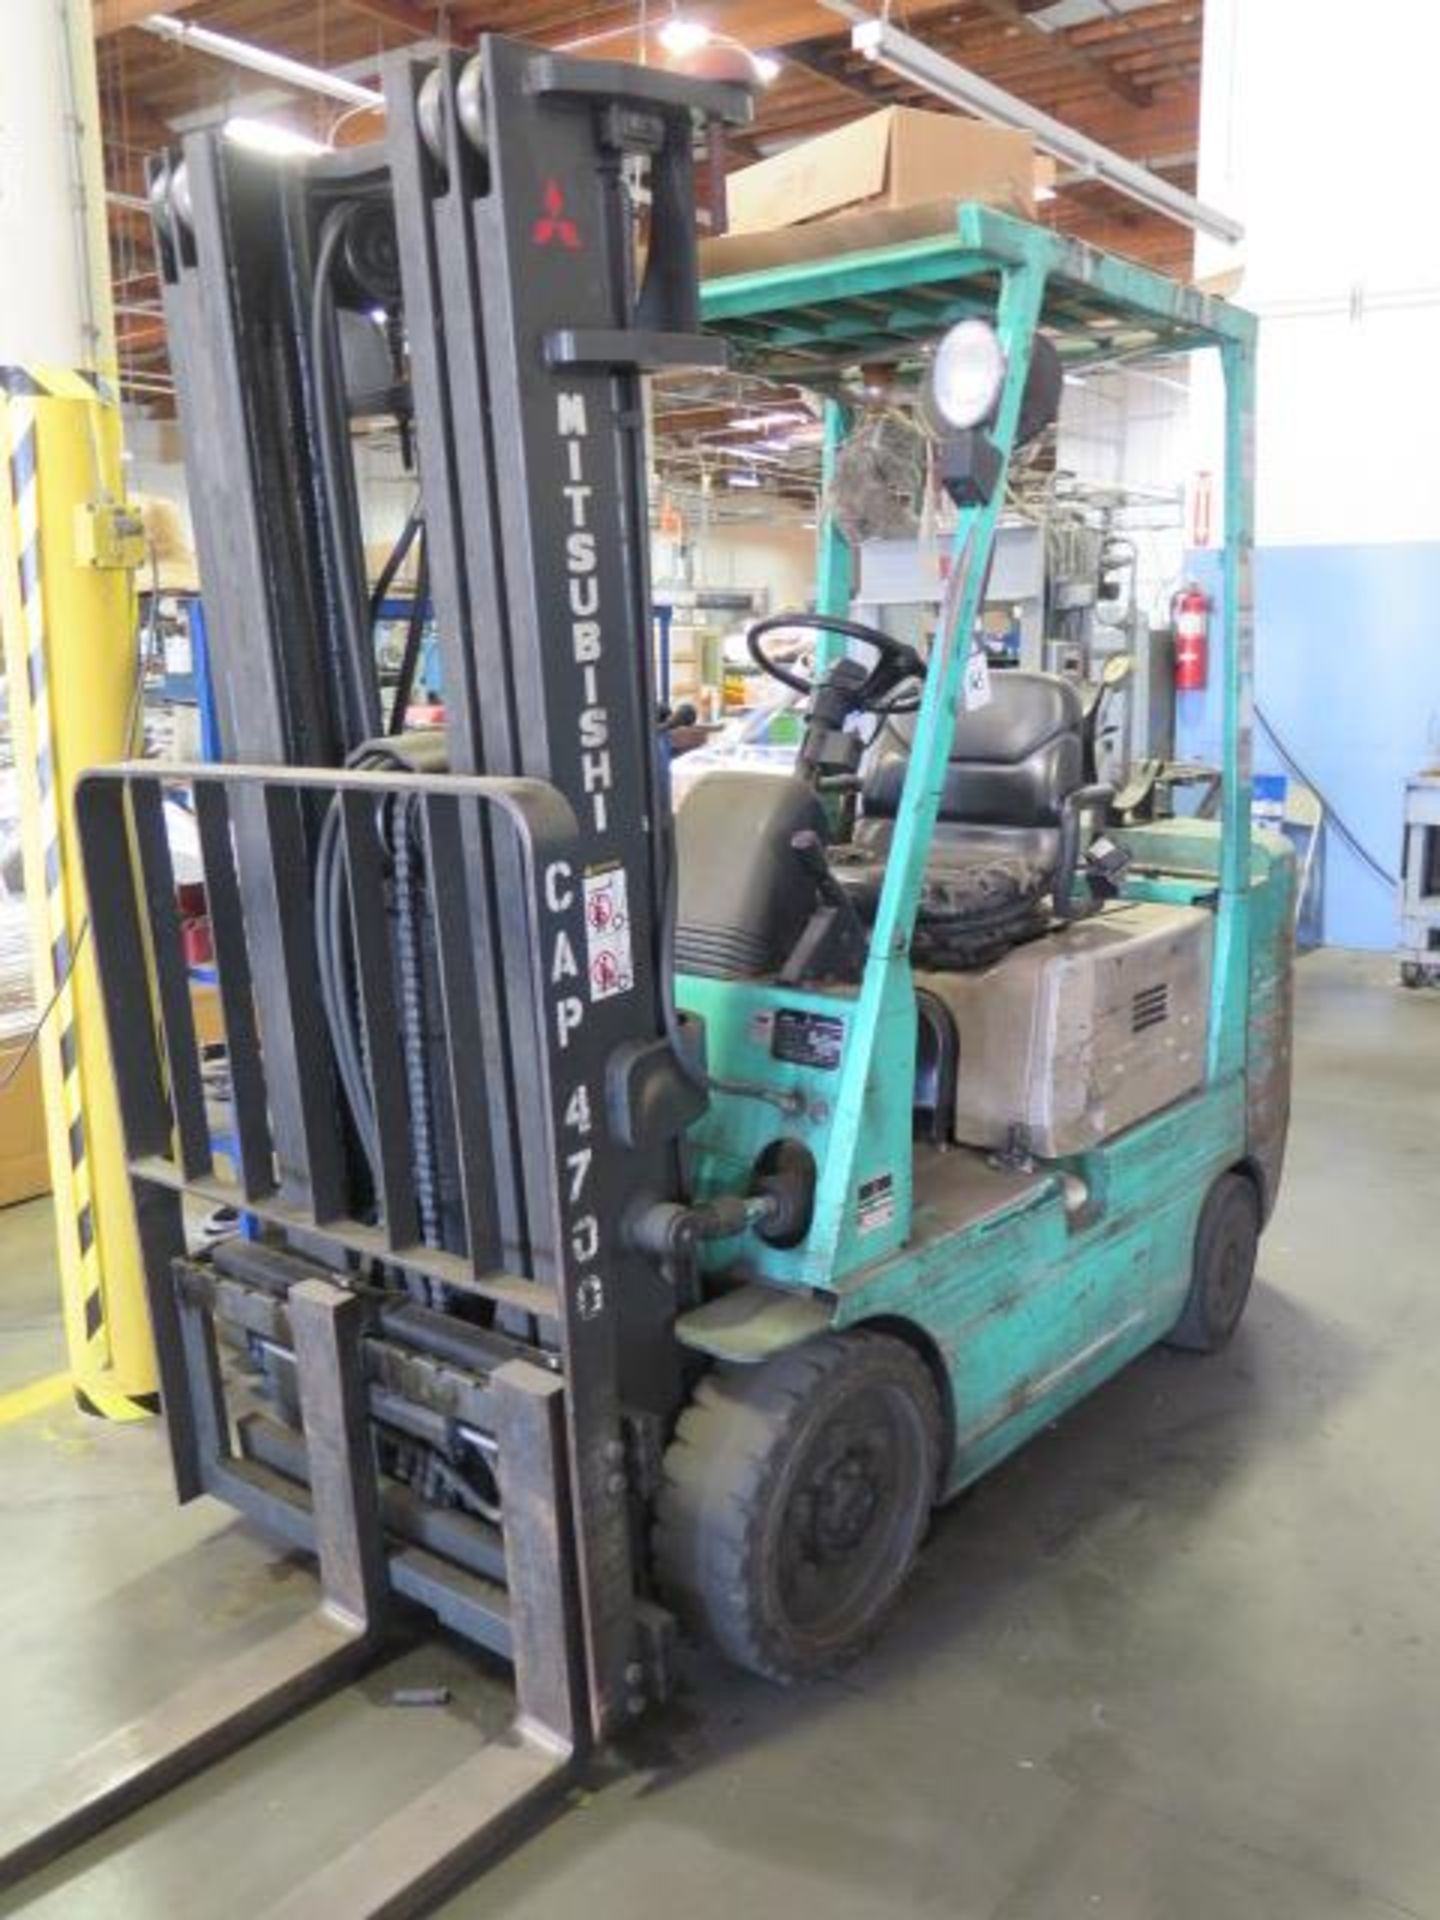 Mitsubishi FGC25 5000 Lb Cap LPG Forklift s/n AF82B-06249 w/ 3-Stage, 198" Lift Height, SOLD AS IS - Image 2 of 12